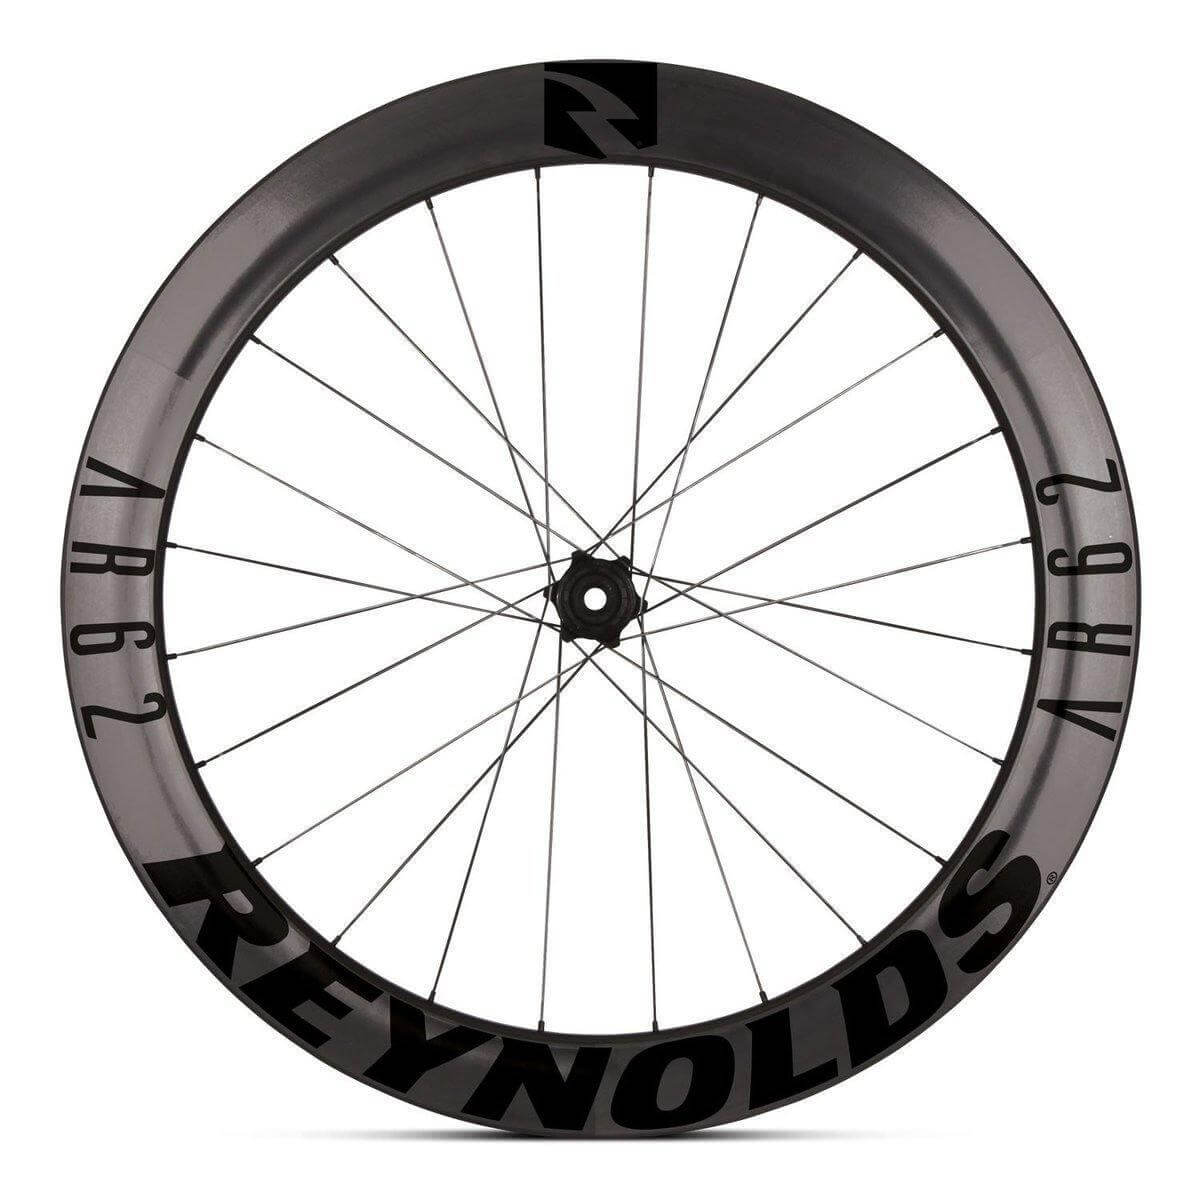 Reynolds AR 58/62 DB Carbon Wheelset | Strictly Bicycles 